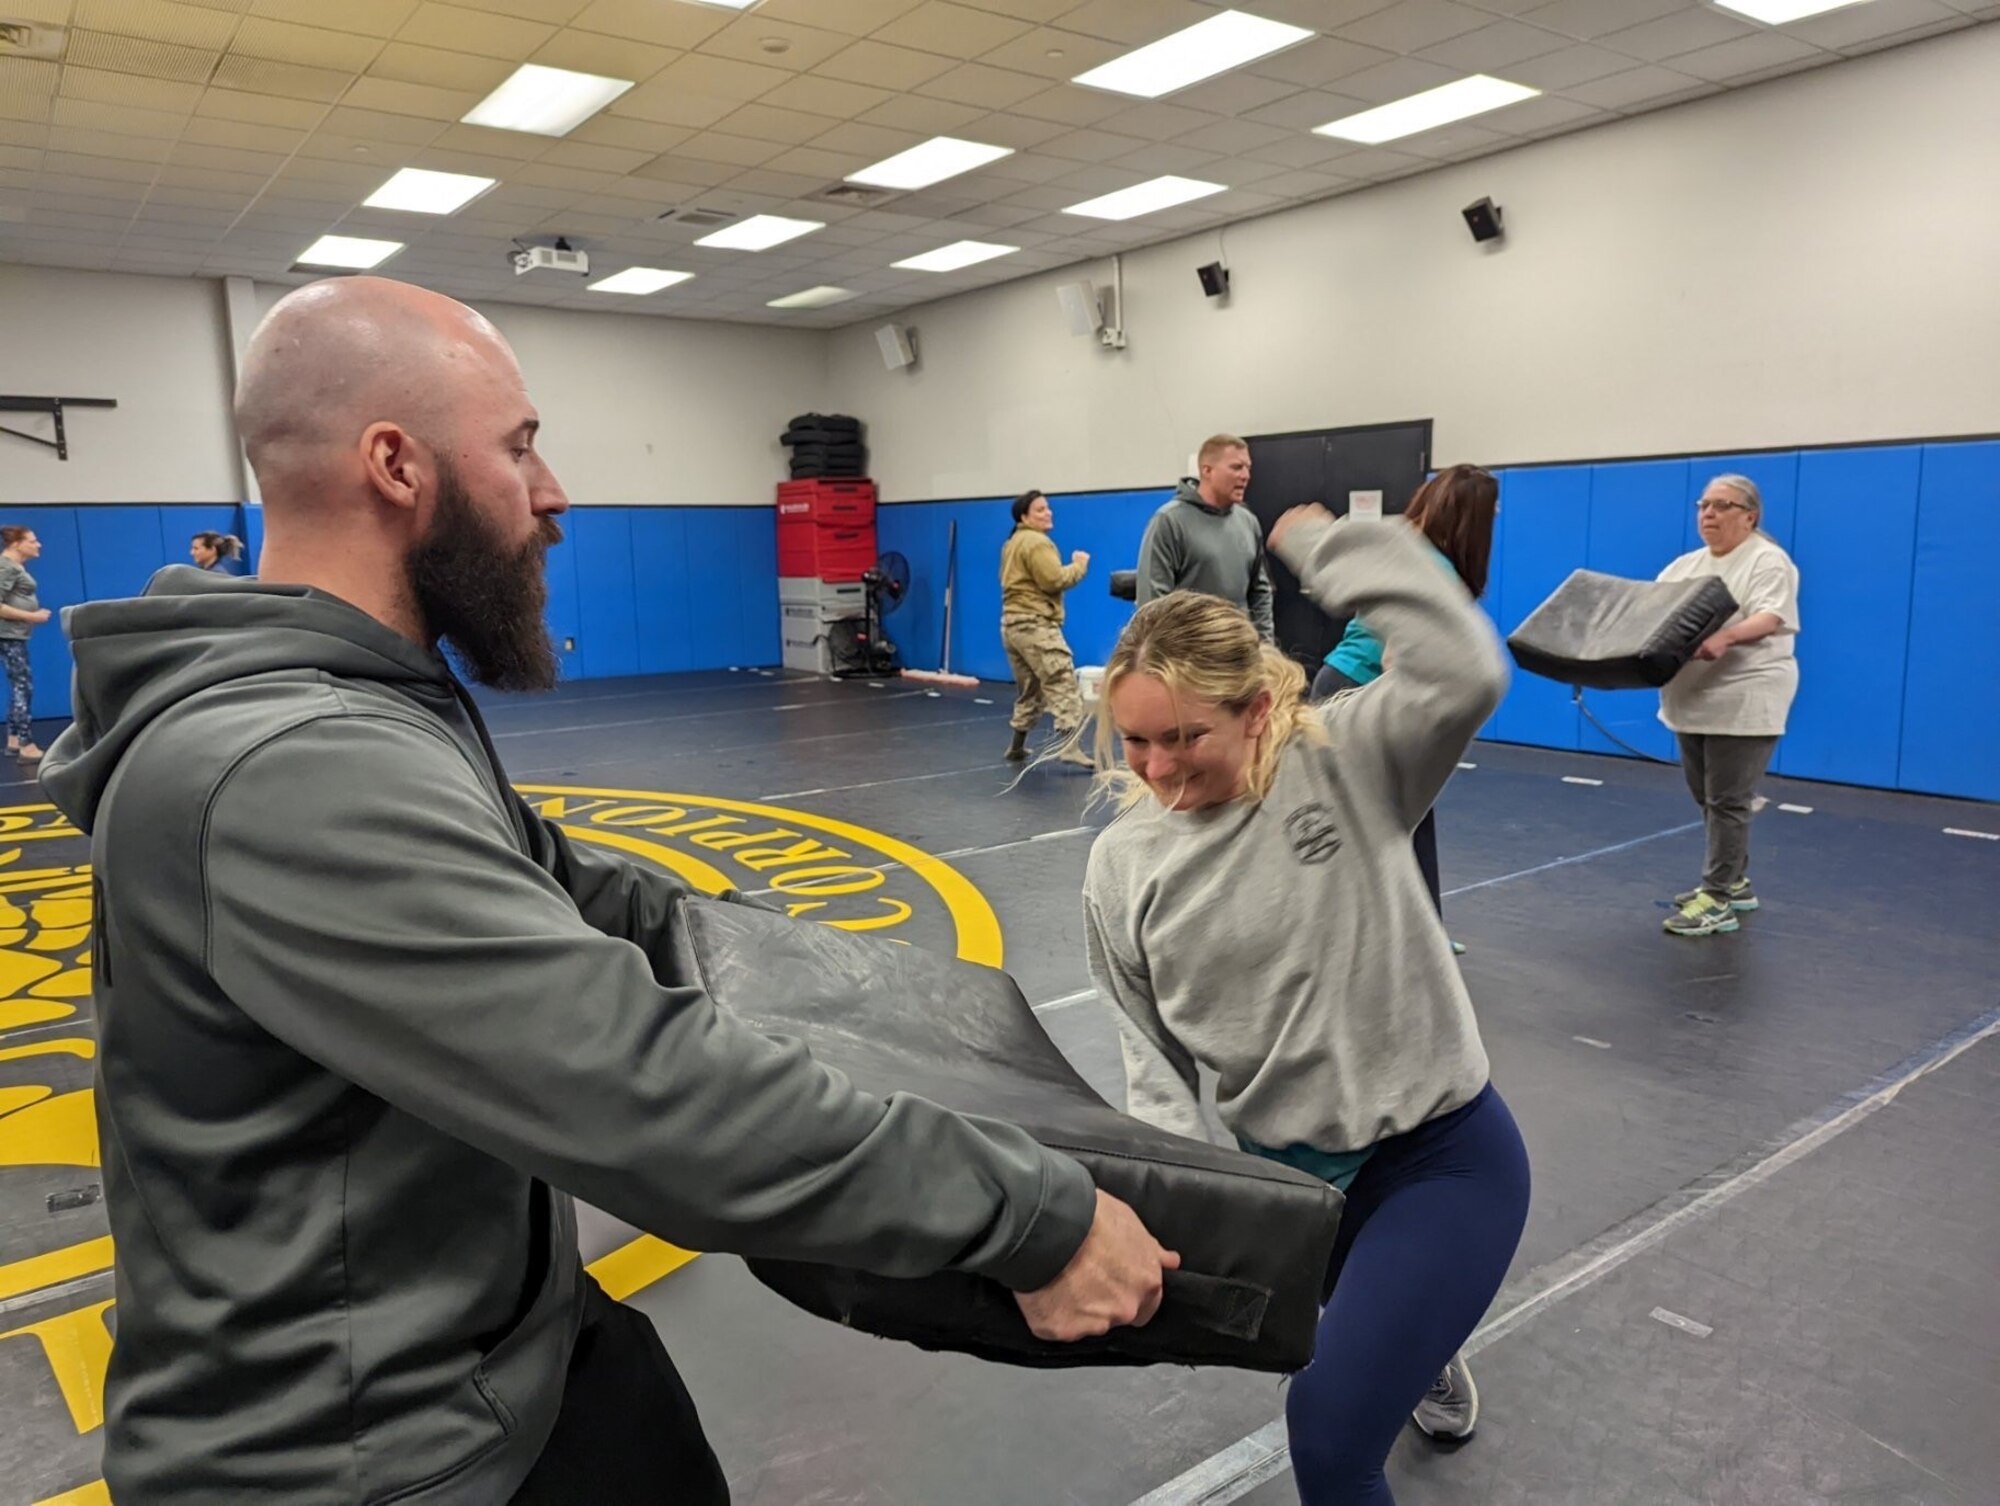 OSI Academy Detachment 1 joined sexual assault prevention offices at Joint Base McGuire-Dix-Lakehurst, New Jersey, in April 2022, to conduct a self-defense seminar for survivors of sexual assault.  The training provided a variety of physical self-defense techniques applicable by anyone regardless of physical ability. (Photo courtesy OSIA Det. 1)